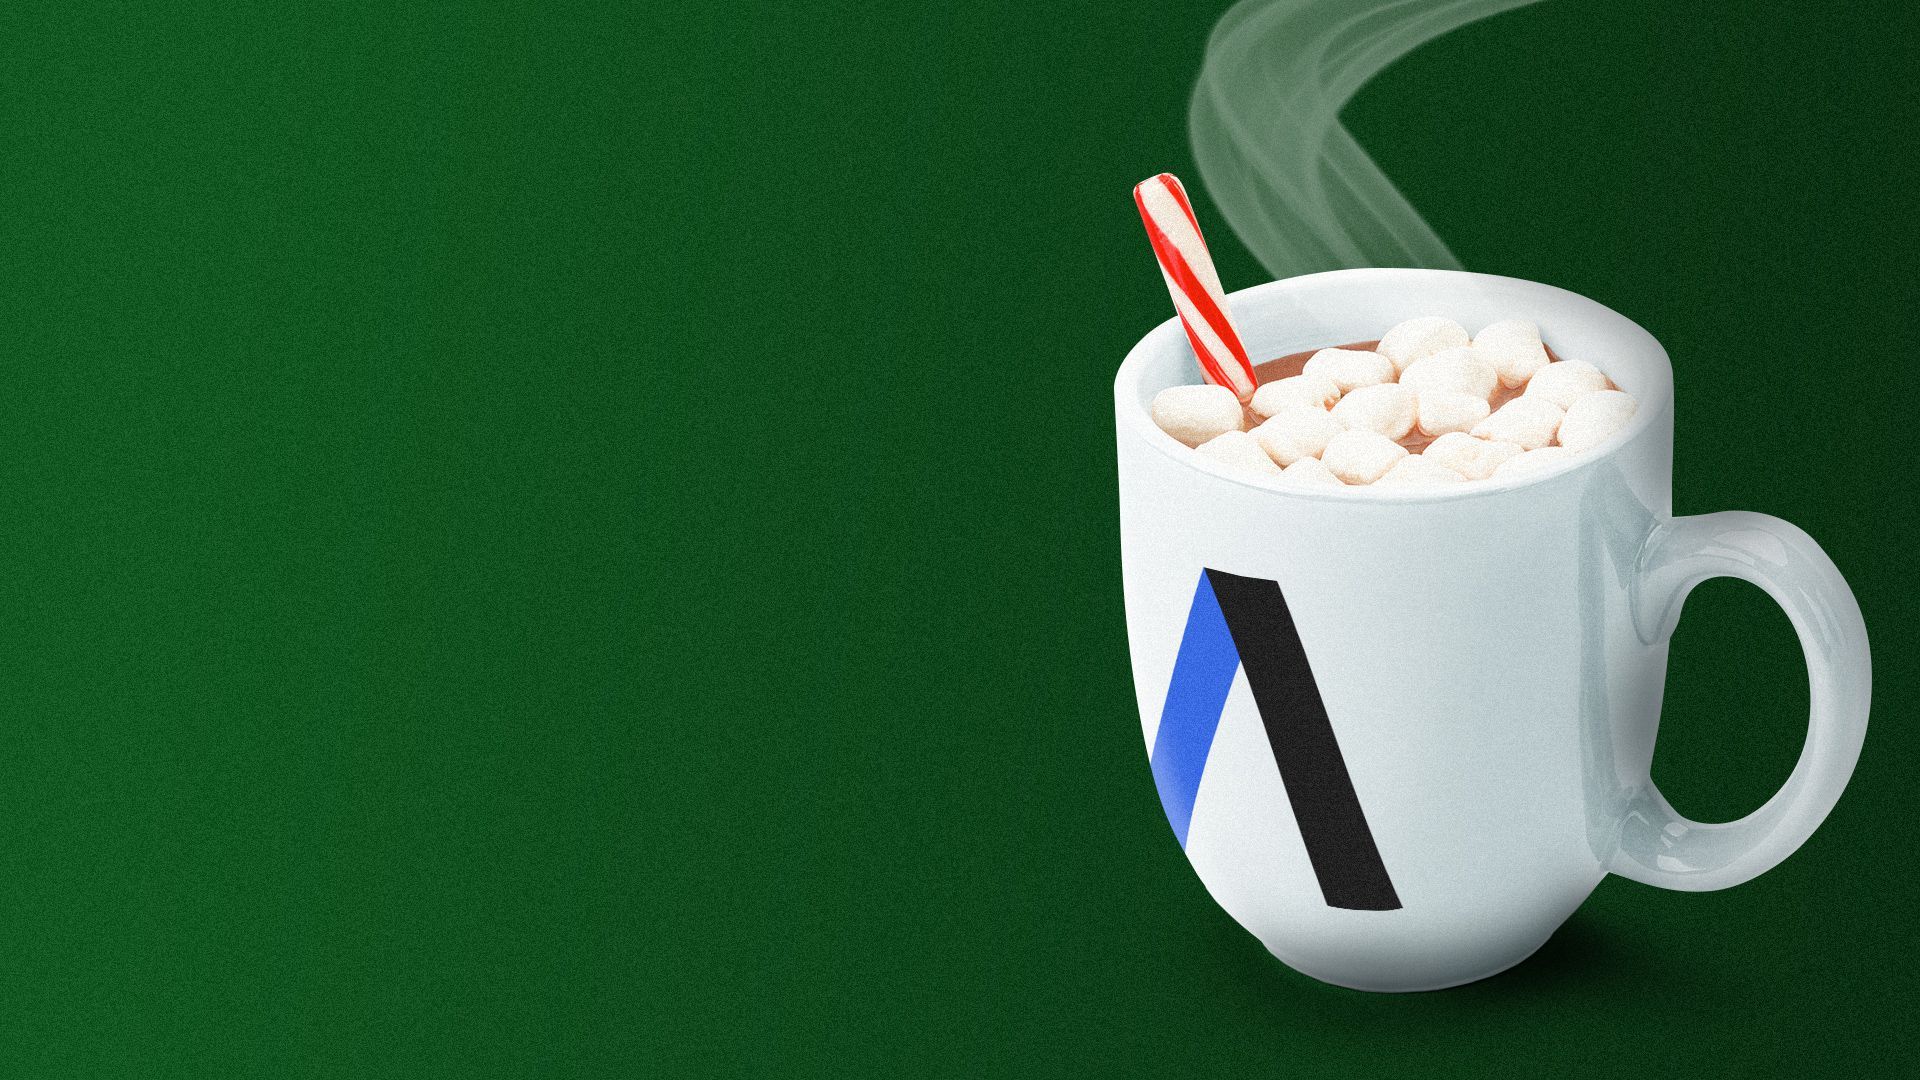 Illustration of a mug of hot cocoa with a peppermint stick and marshmellows—an Axios "A" is on the mug.